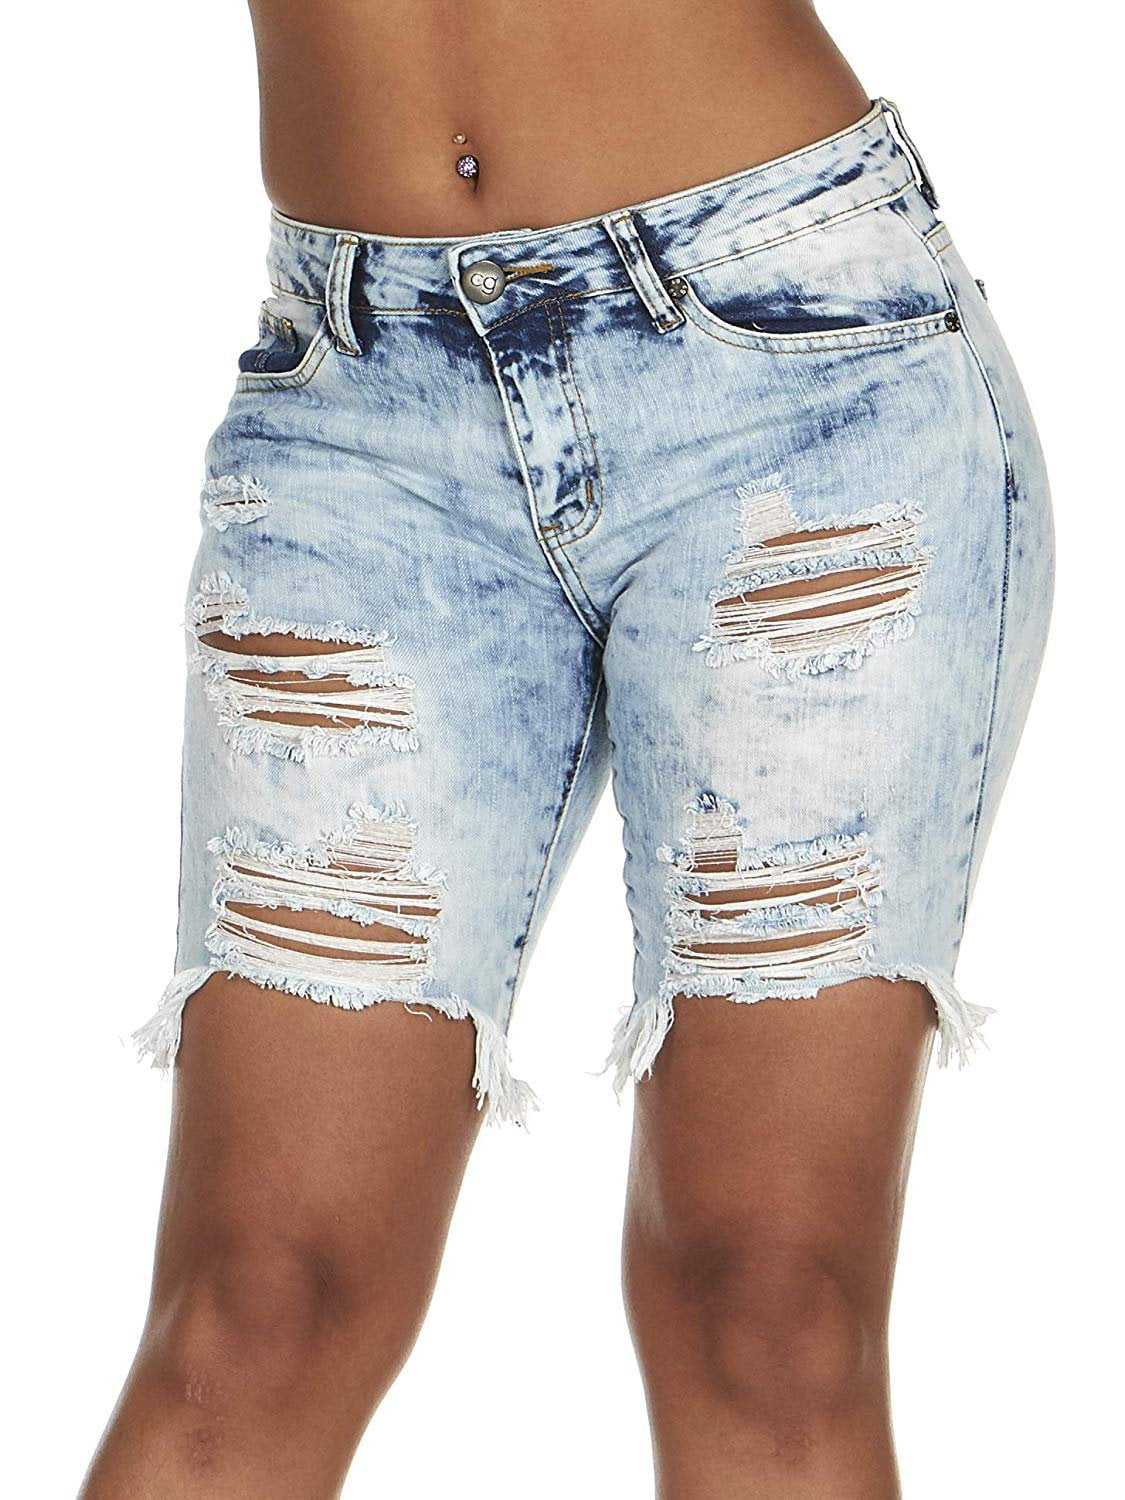 CG Jeans - Cover Girl Jeans Juniors Ripped Distressed high Rise Bermuda ...